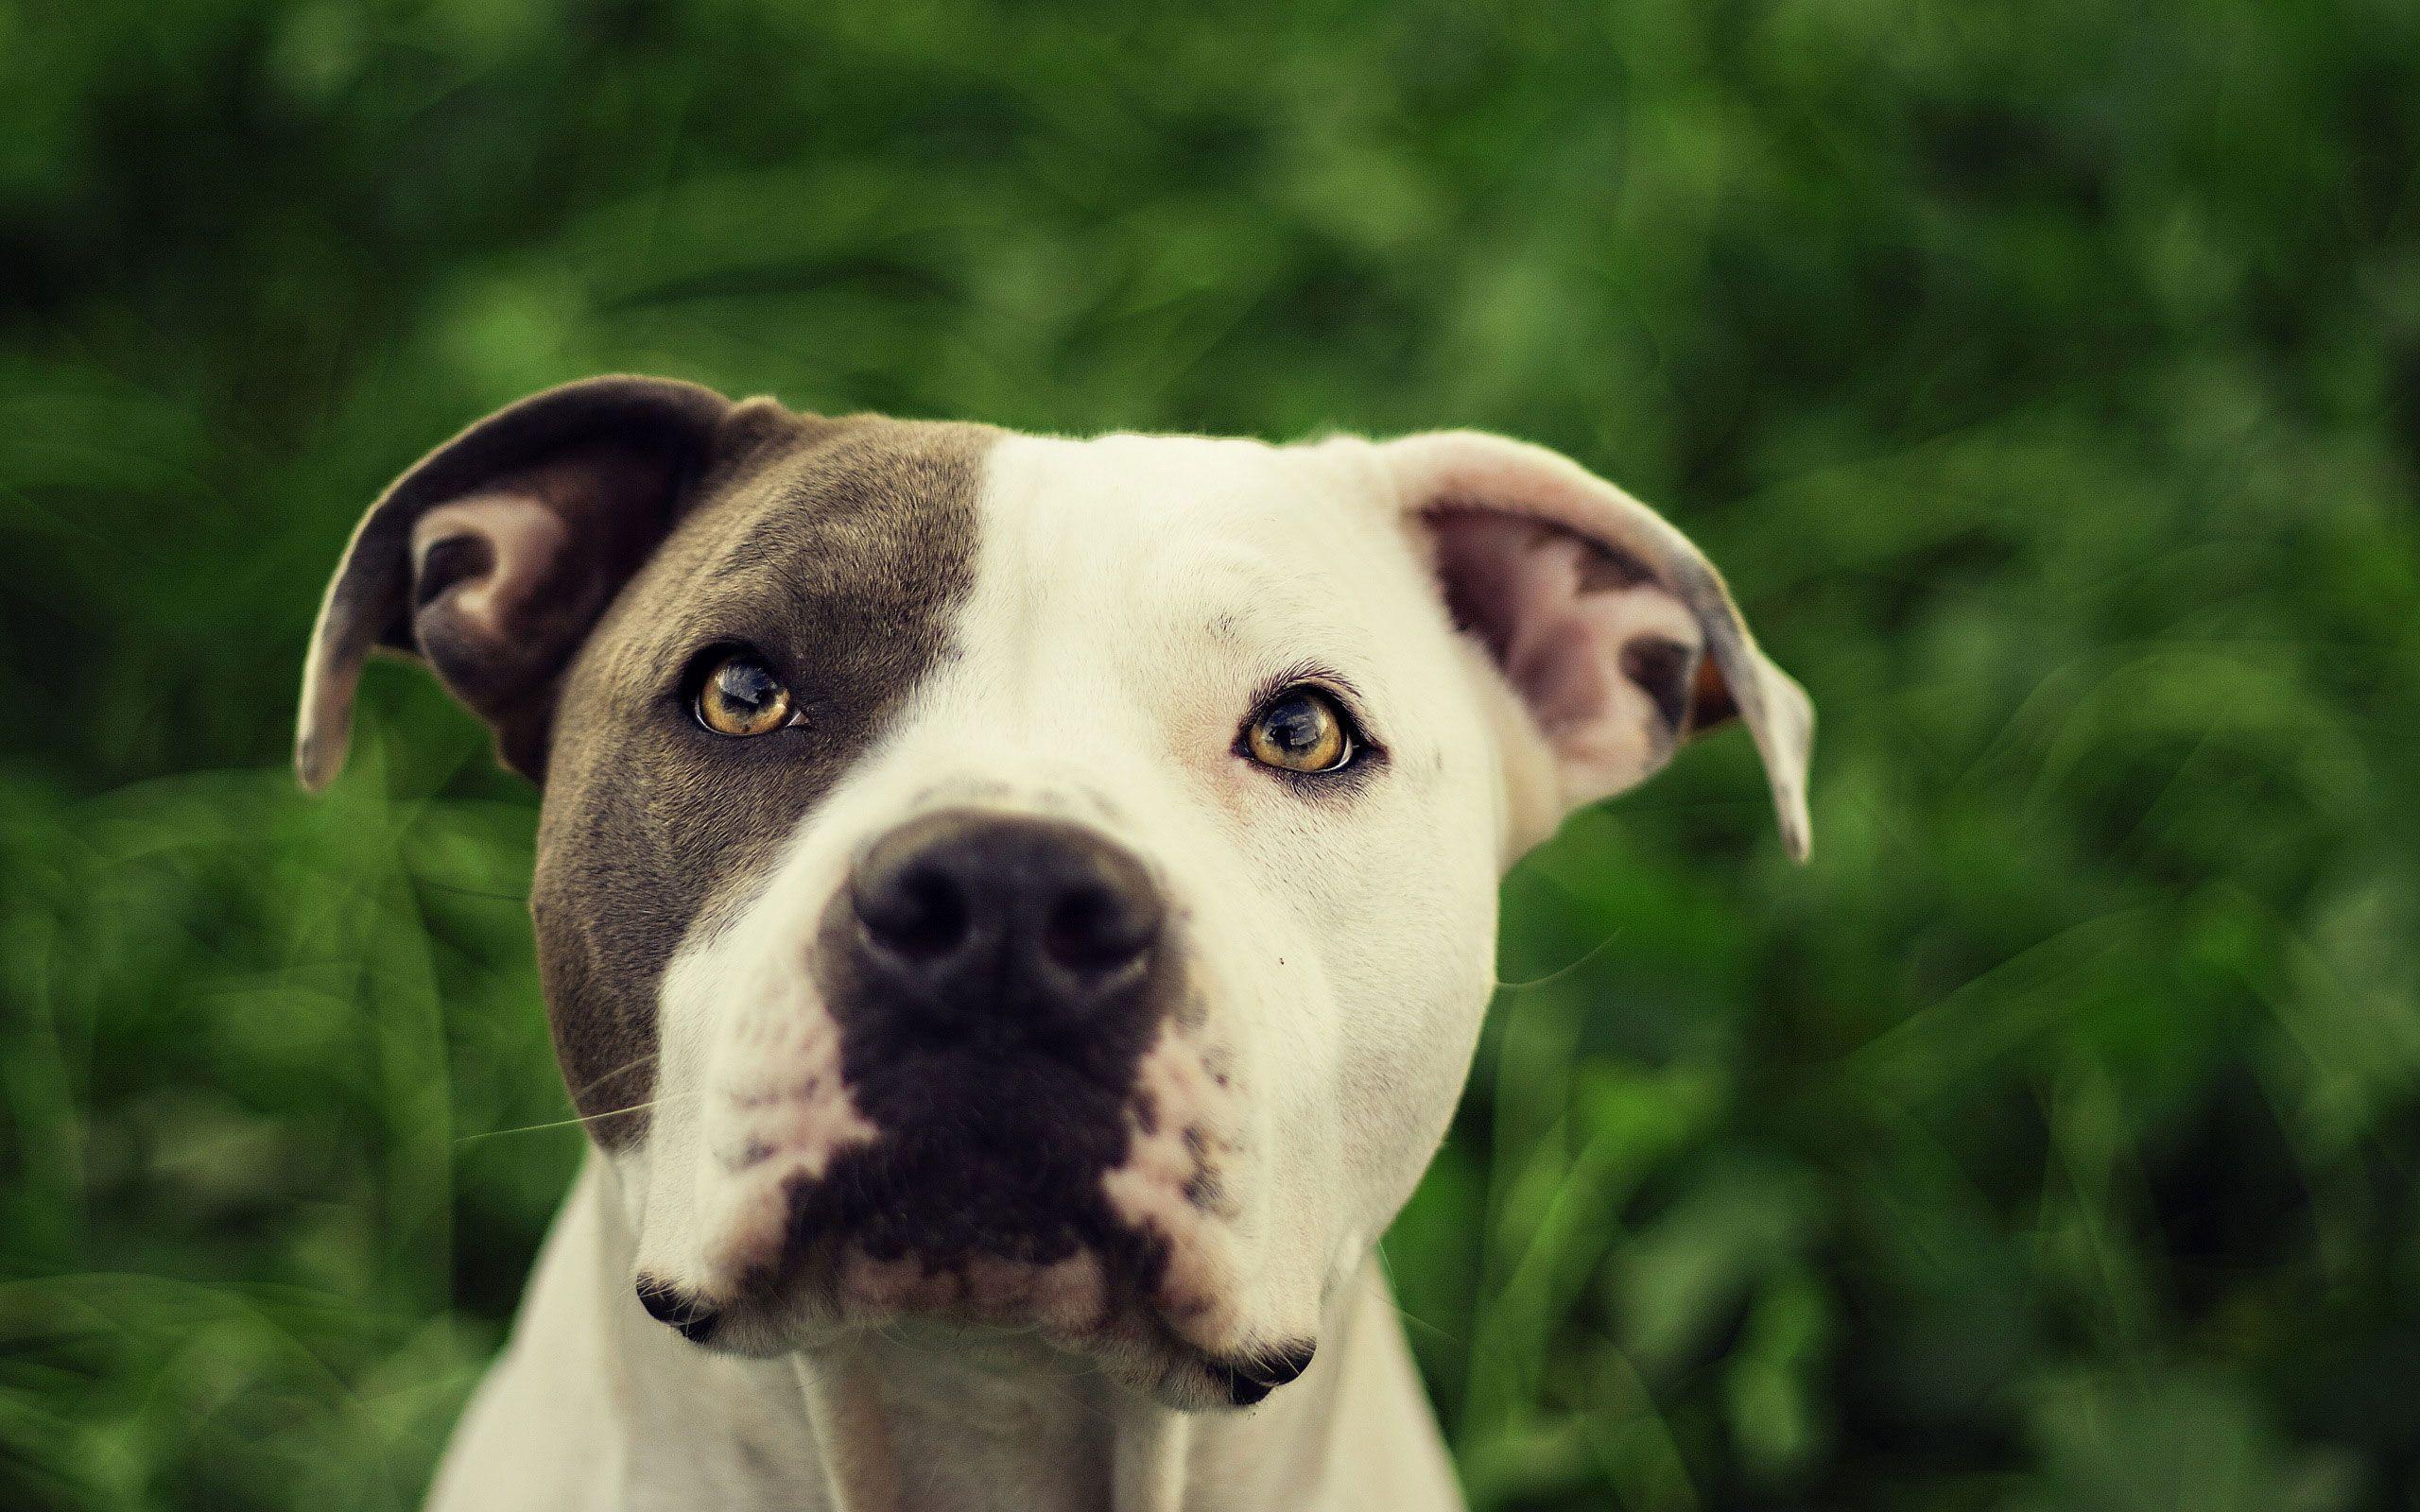 Pit Bull Dog HD Wallpaper Desktop Image Cool Picture Of Cute